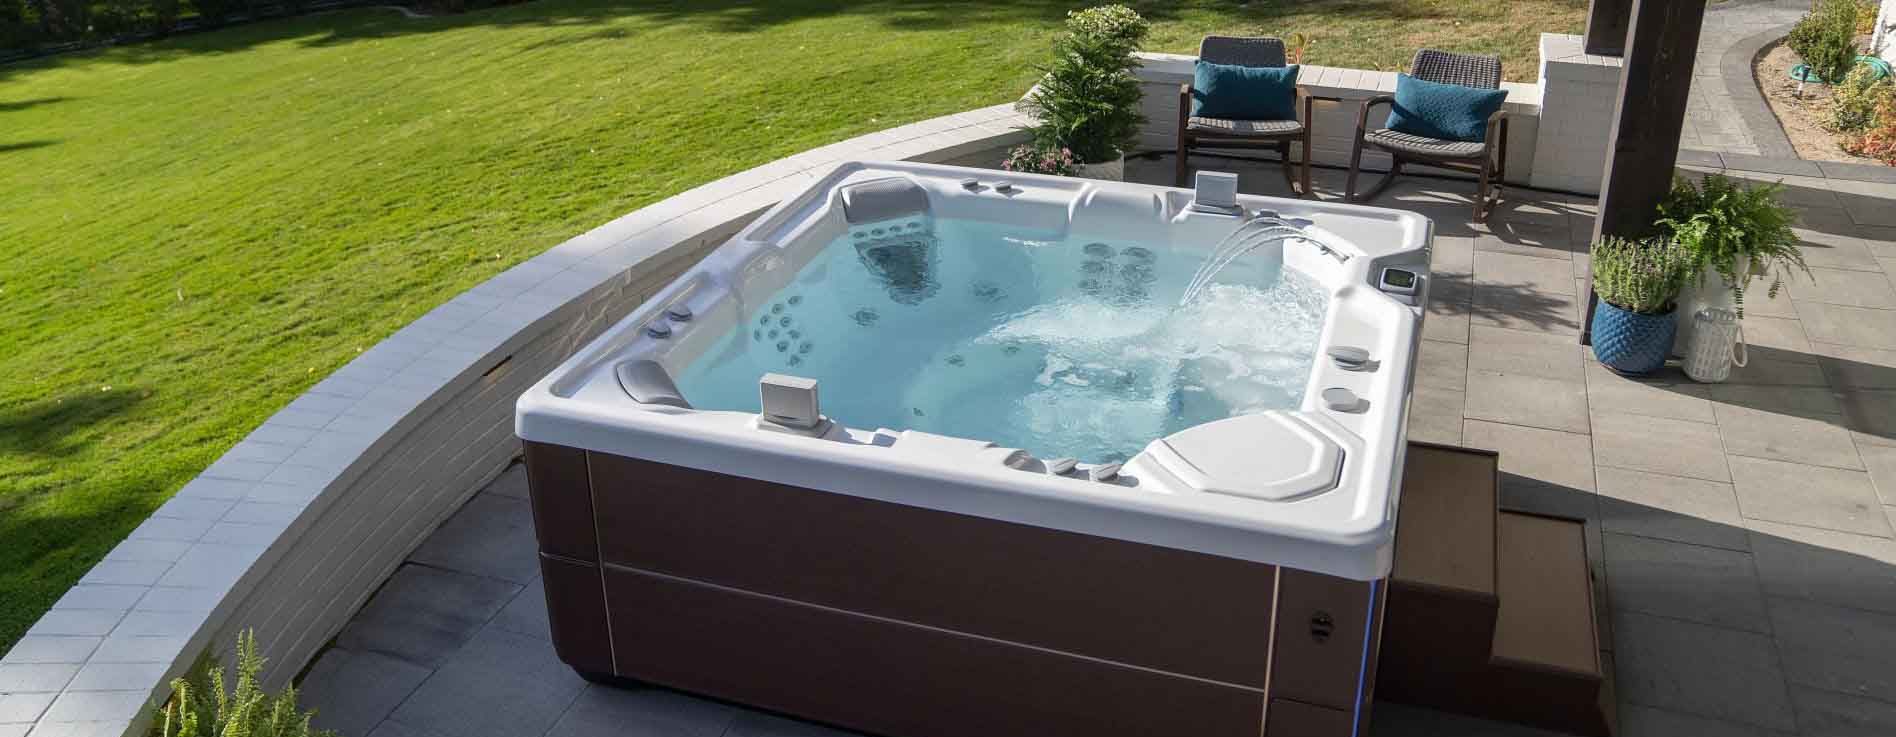 Top Tips for Spring Cleaning Your Hot Tub